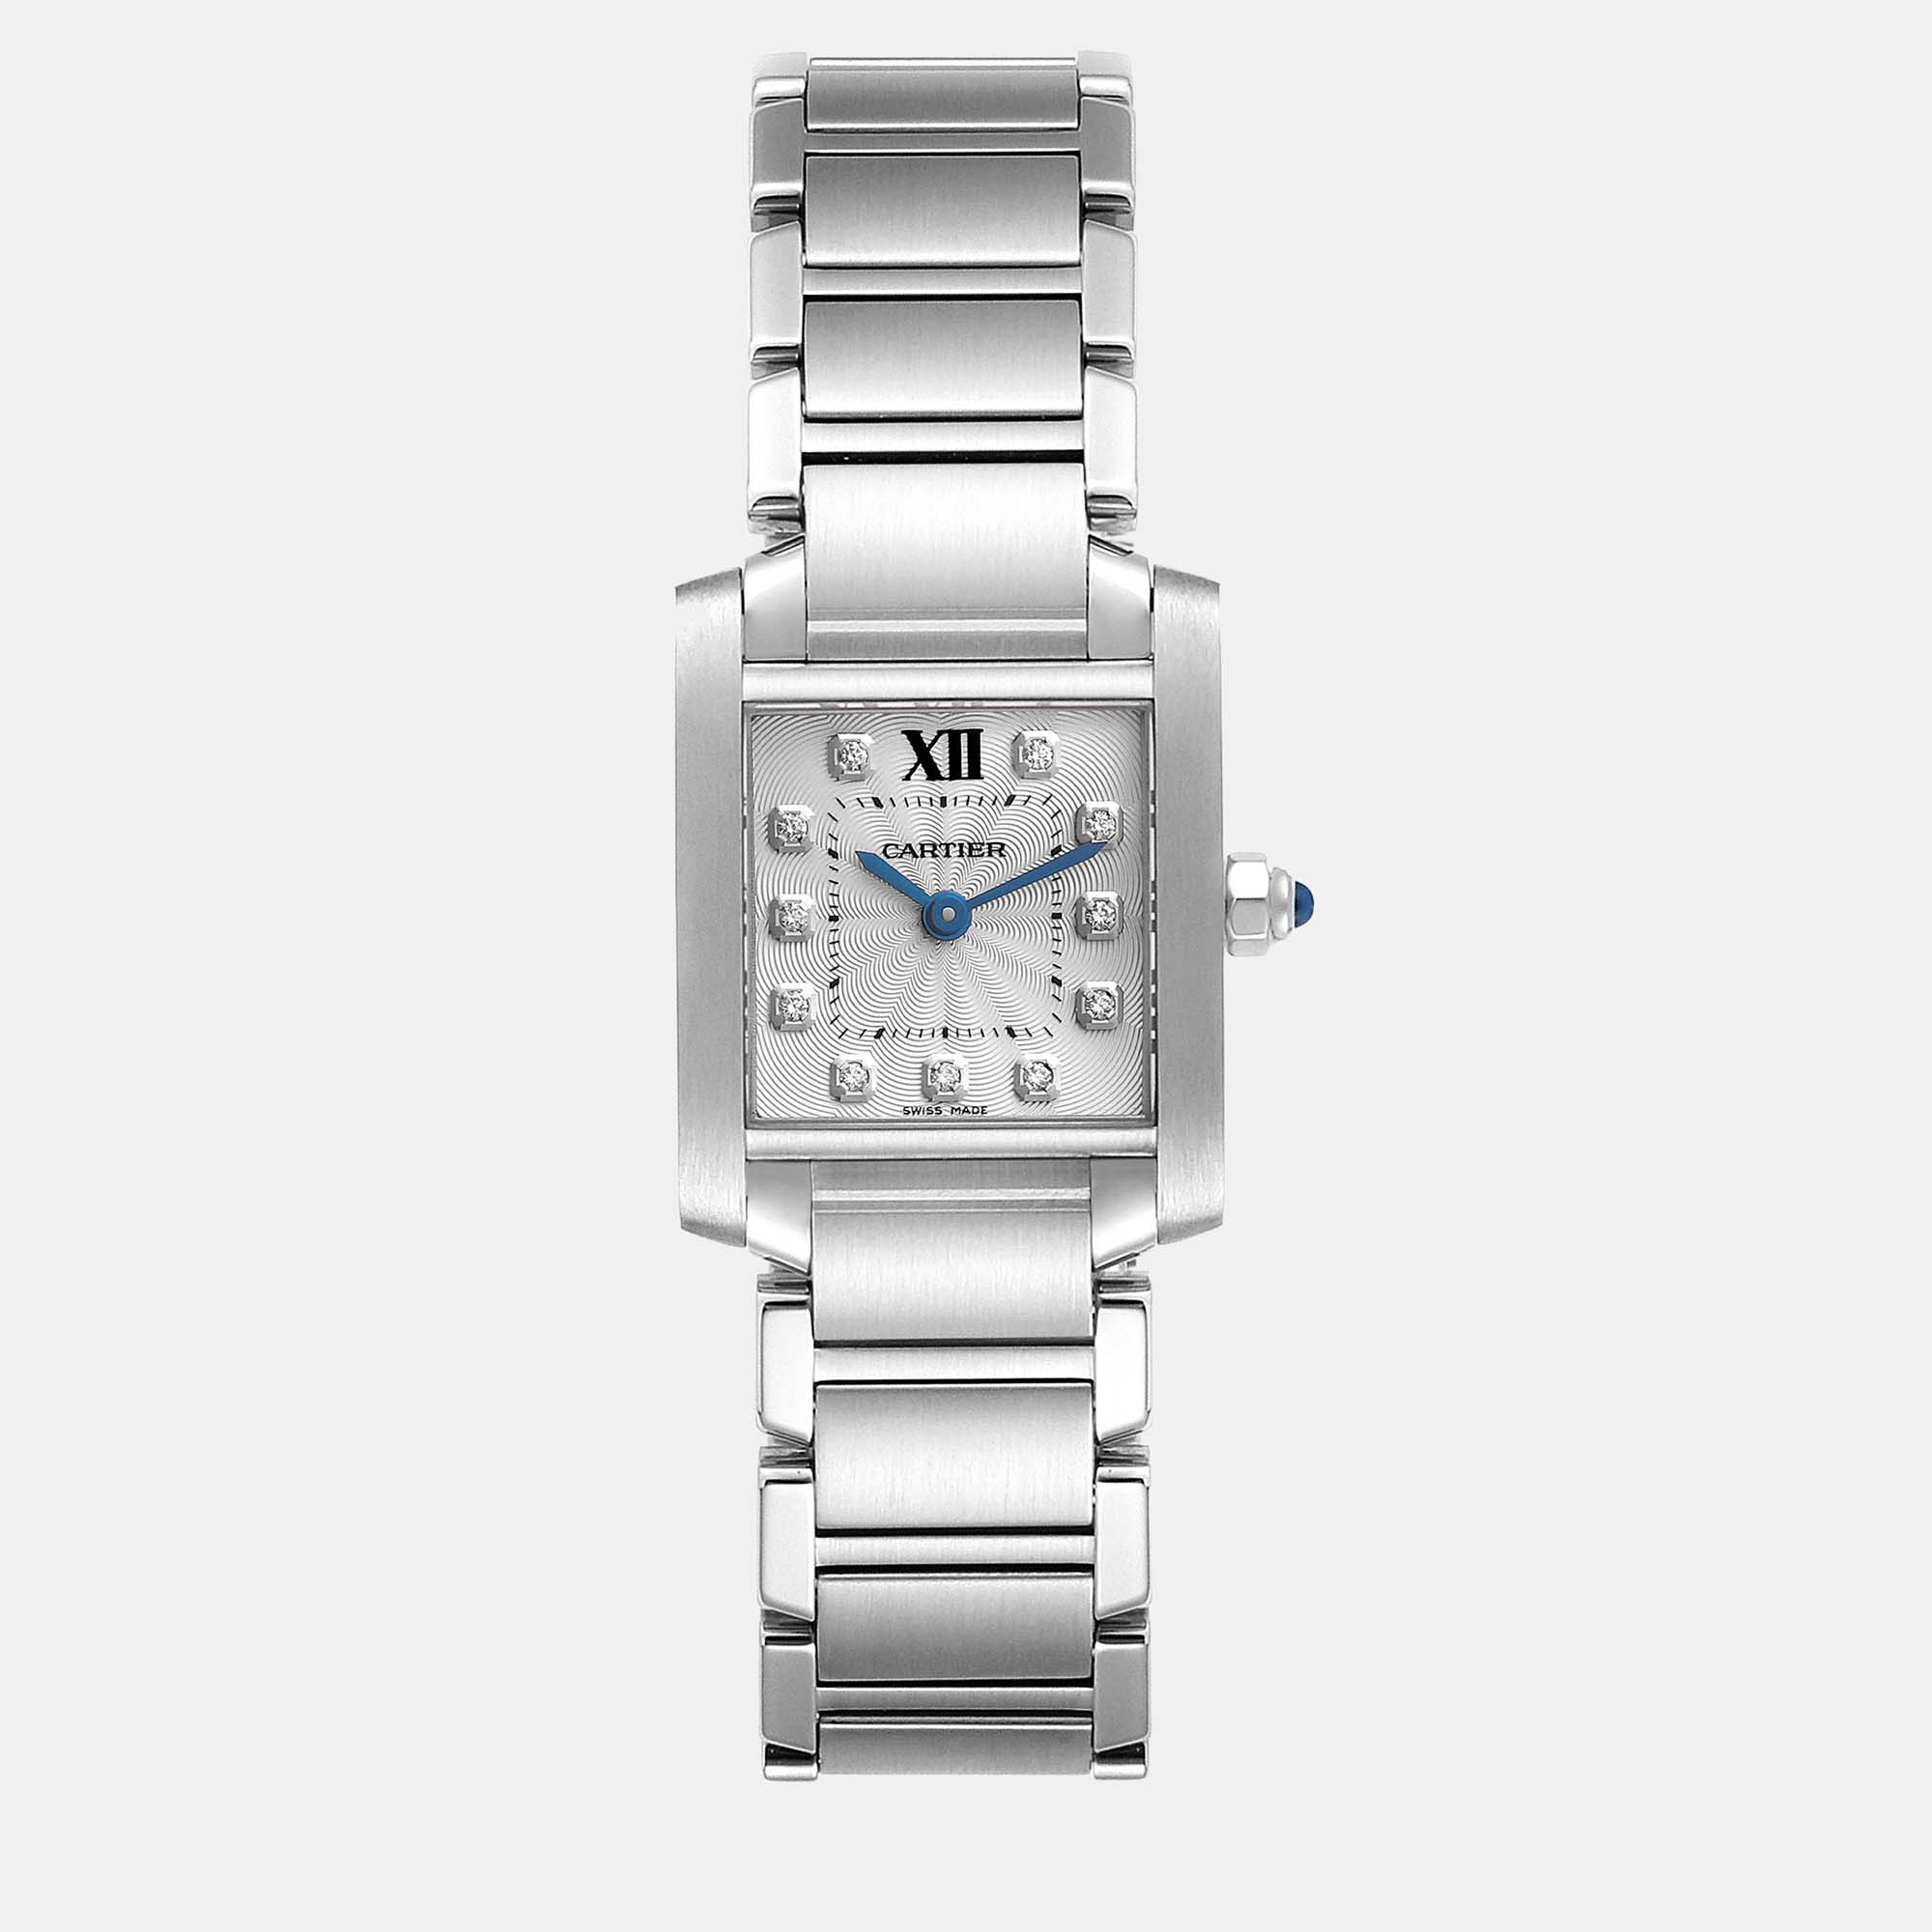 Cartier tank francaise small steel diamond dial ladies watch we110006 20 x 25 mm